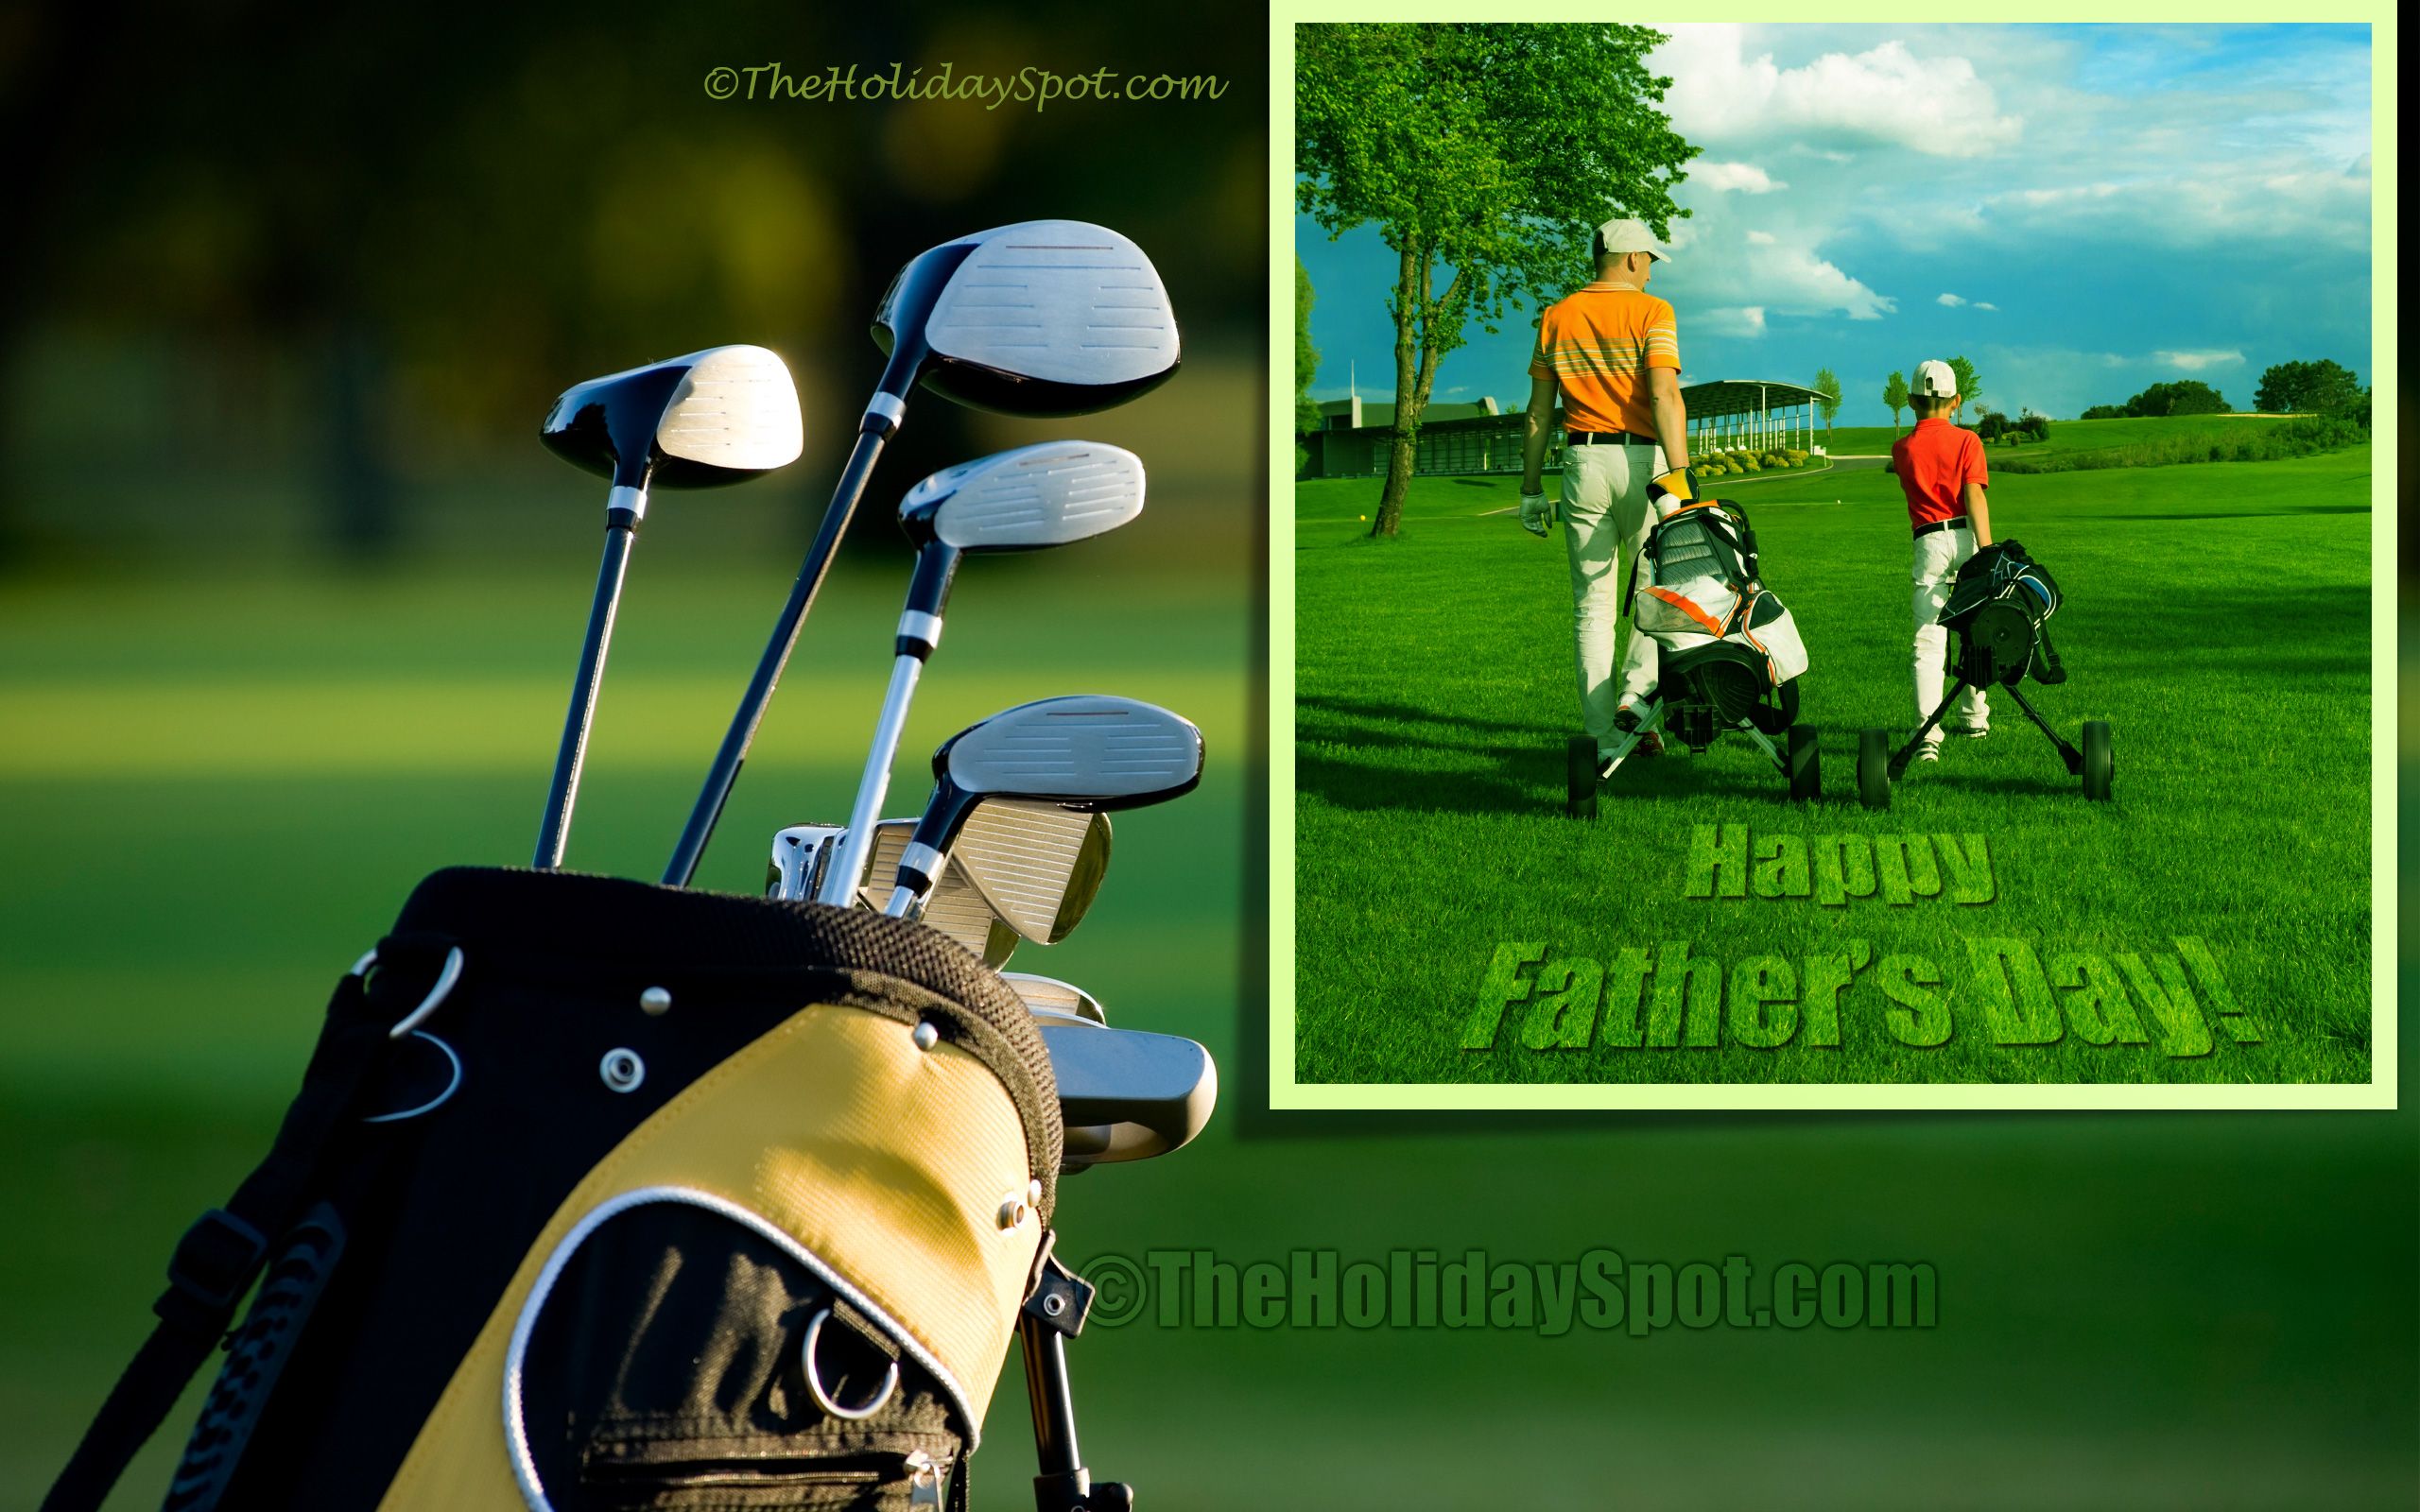 Fathers Day Wallpaper. Fathers Day Image 2020 HD. Happy